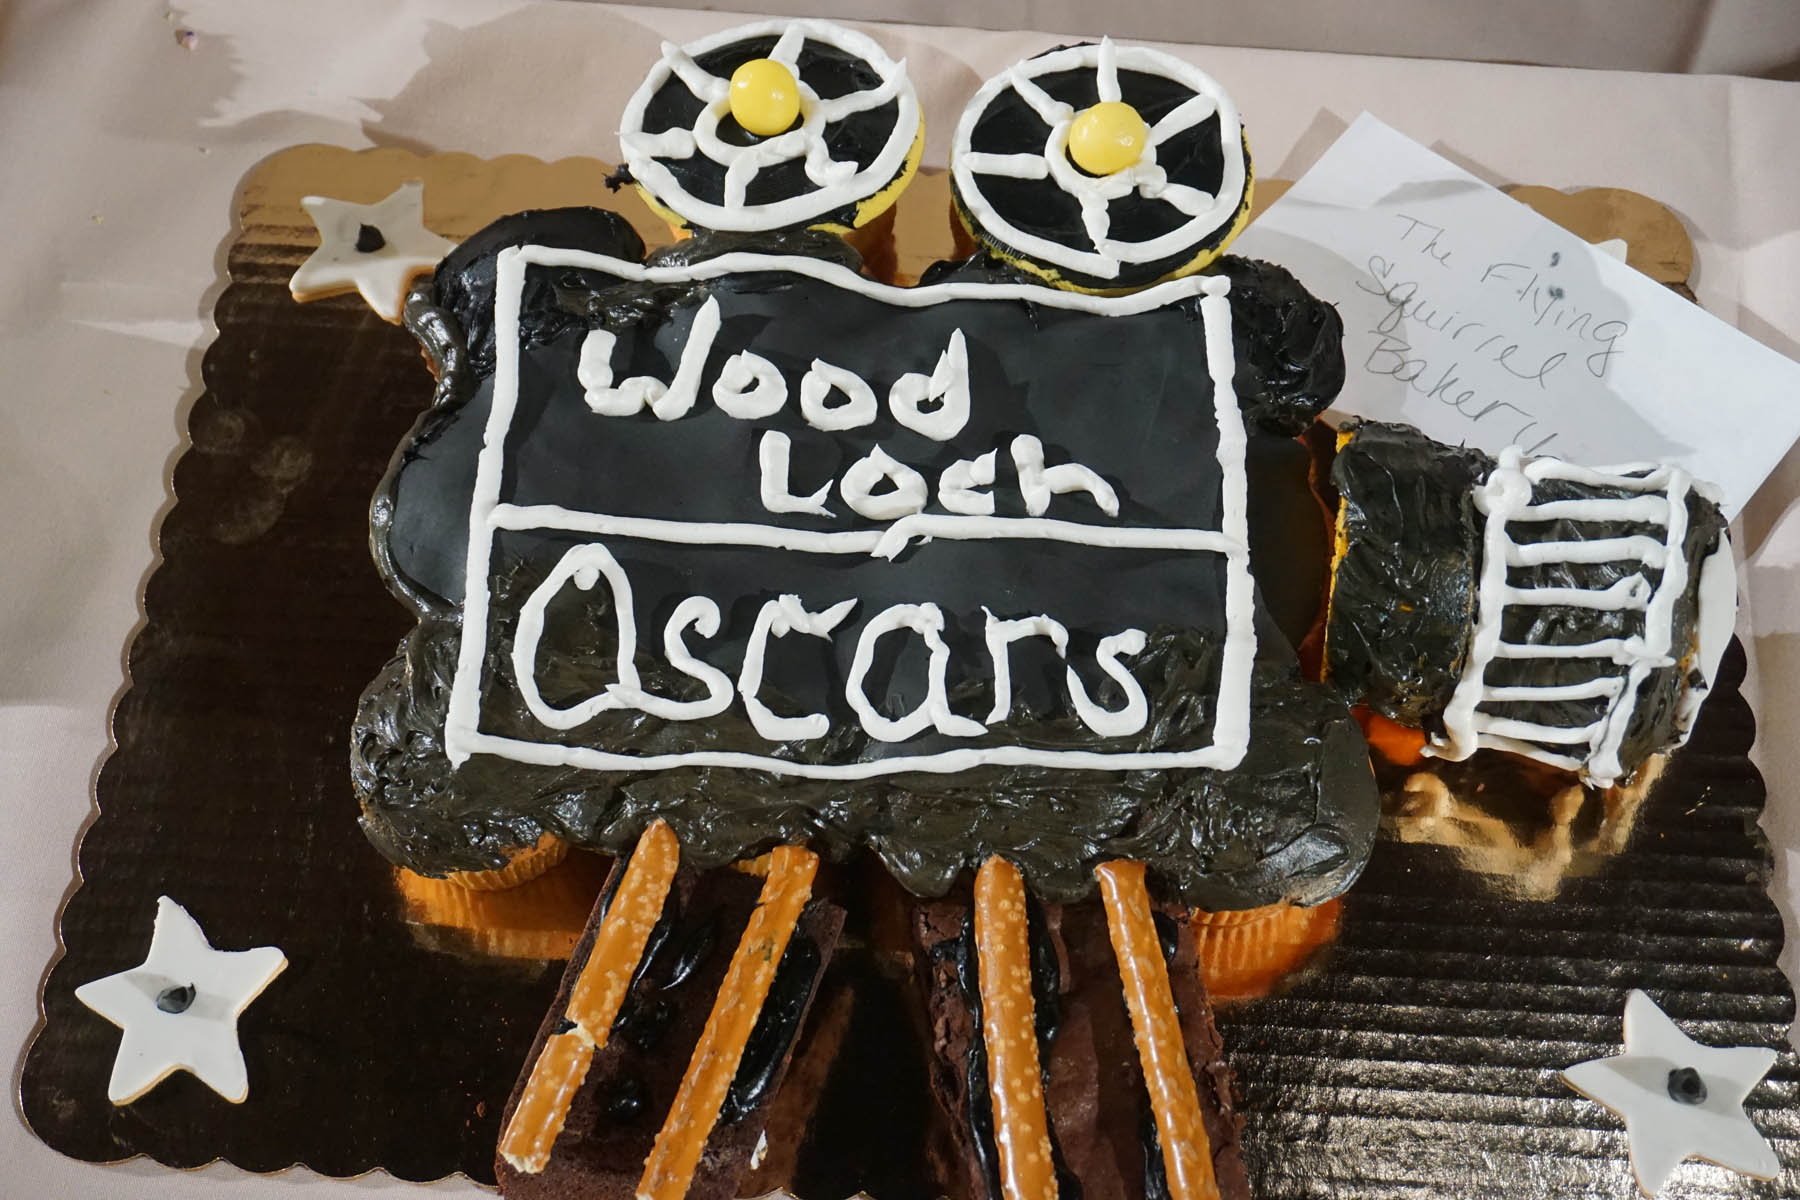 Motion picture camera cake. Text: Woodloch Oscars.